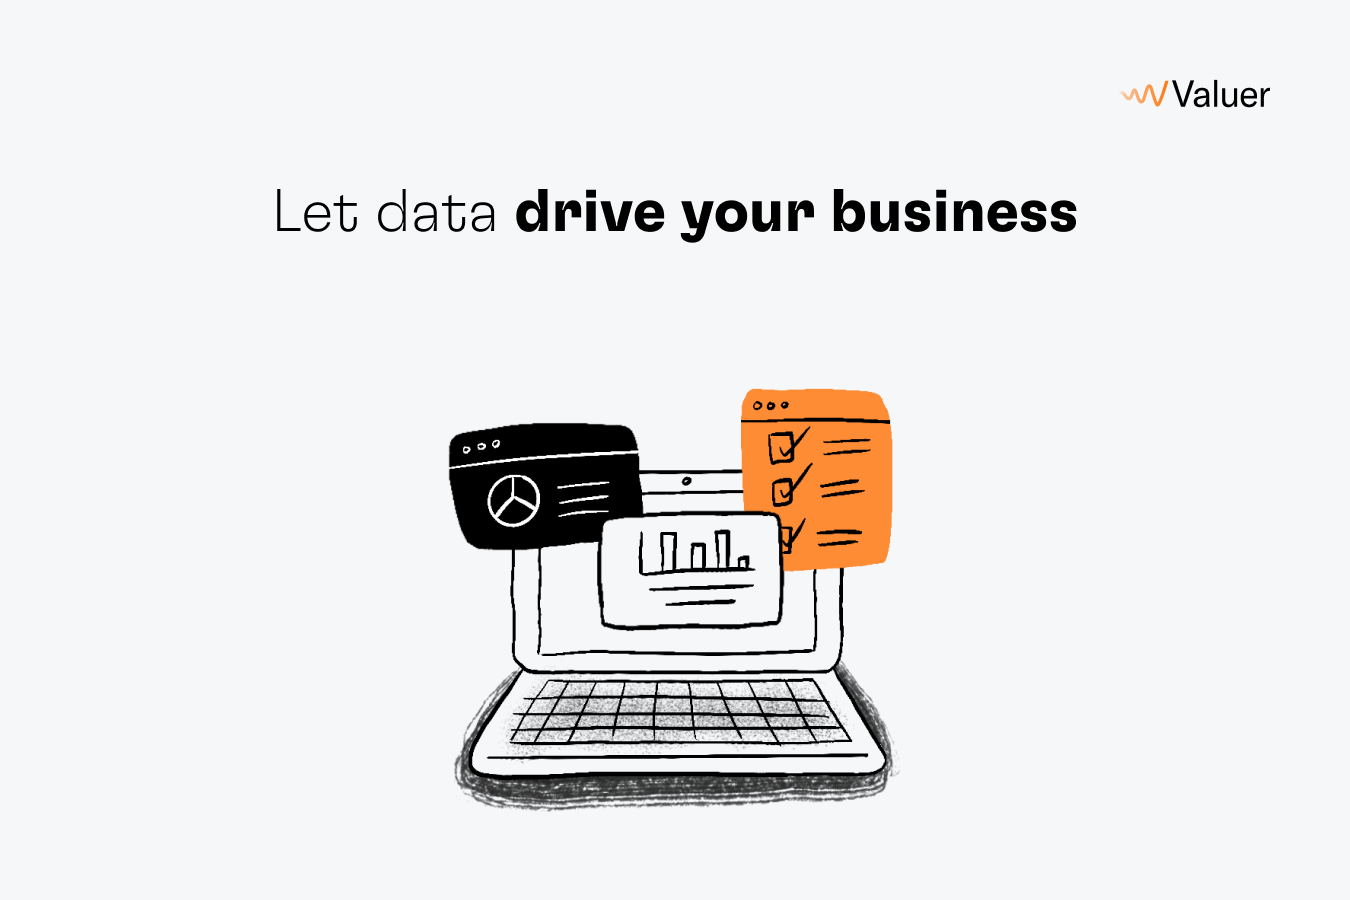 Let data drive your business